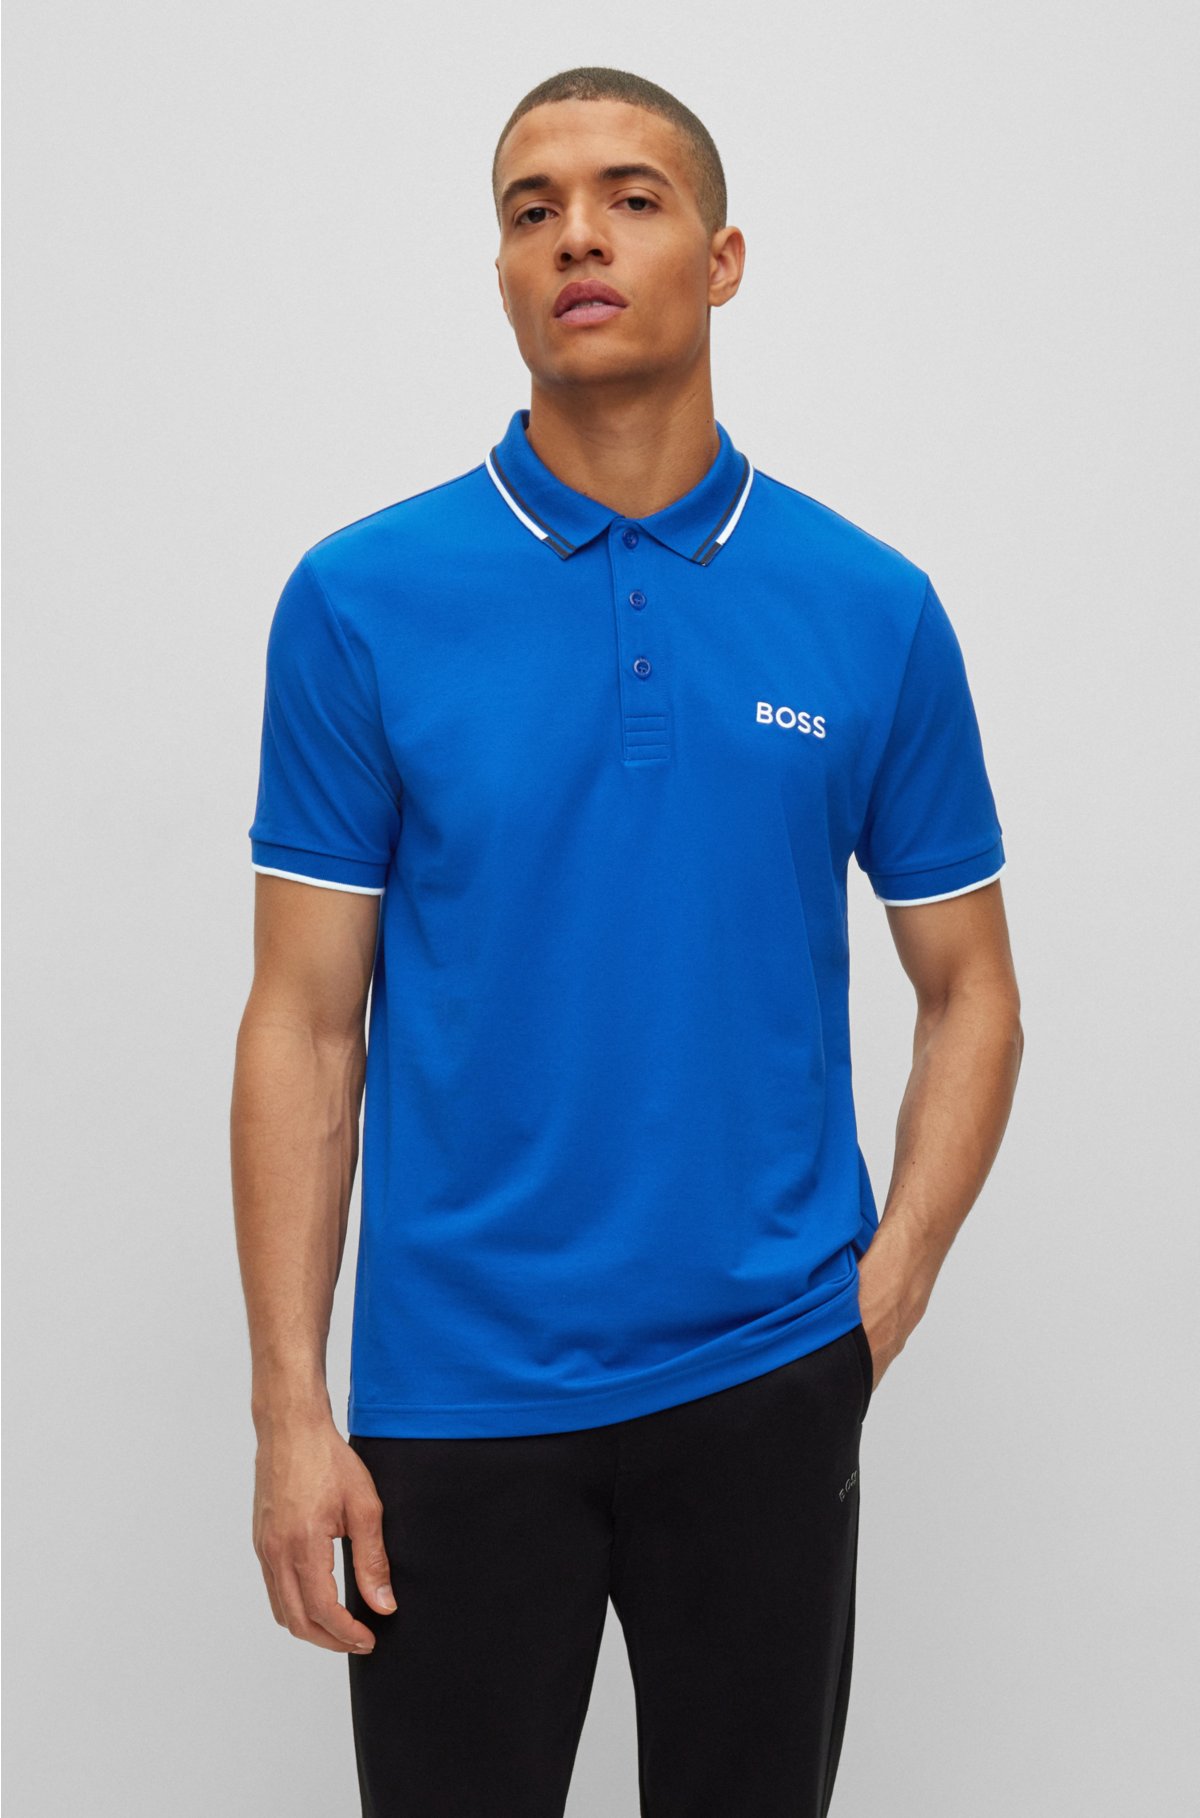 contrast polo BOSS shirt Cotton-blend - details with